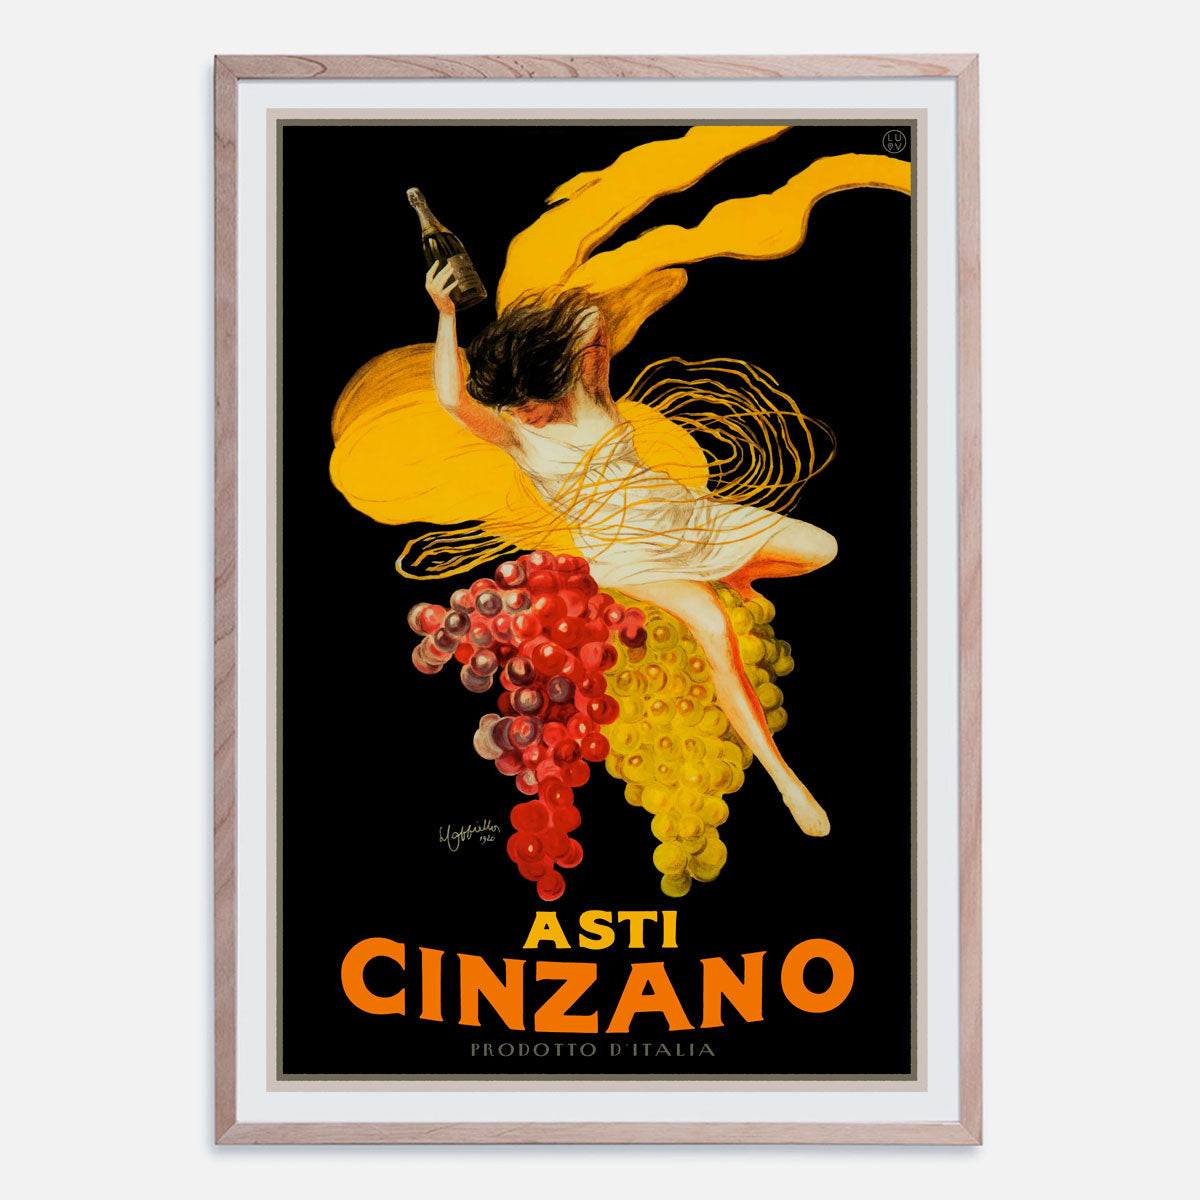 Cinzano retro advertising poster, oak frame, Italy Places we Luv